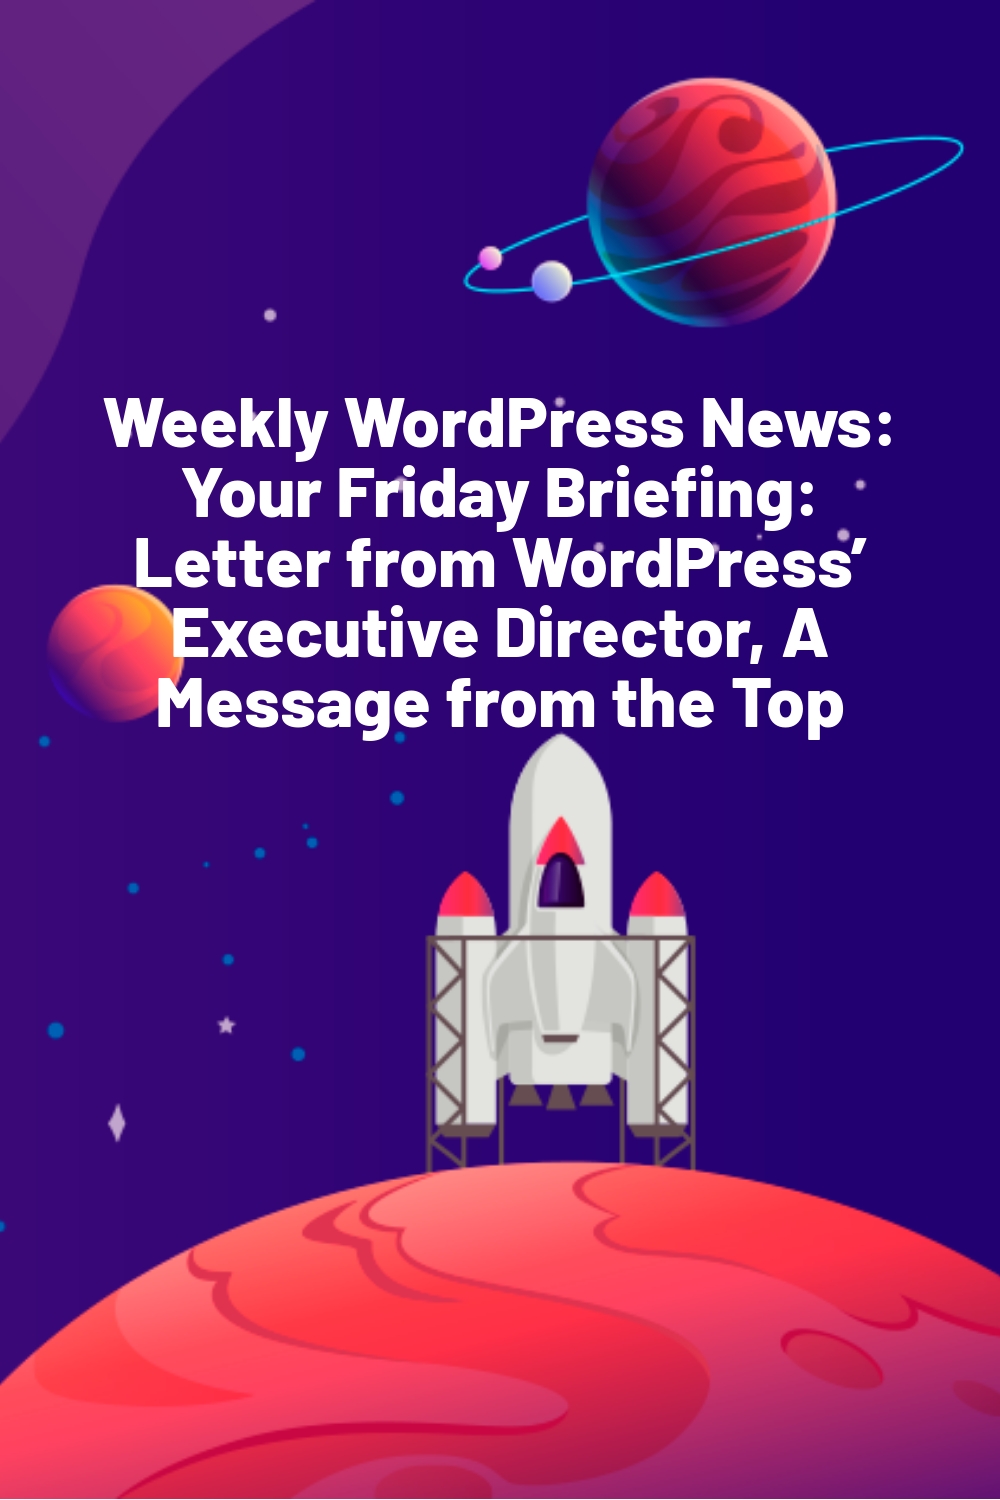 Weekly WordPress News: Your Friday Briefing: Letter from WordPress’ Executive Director, A Message from the Top